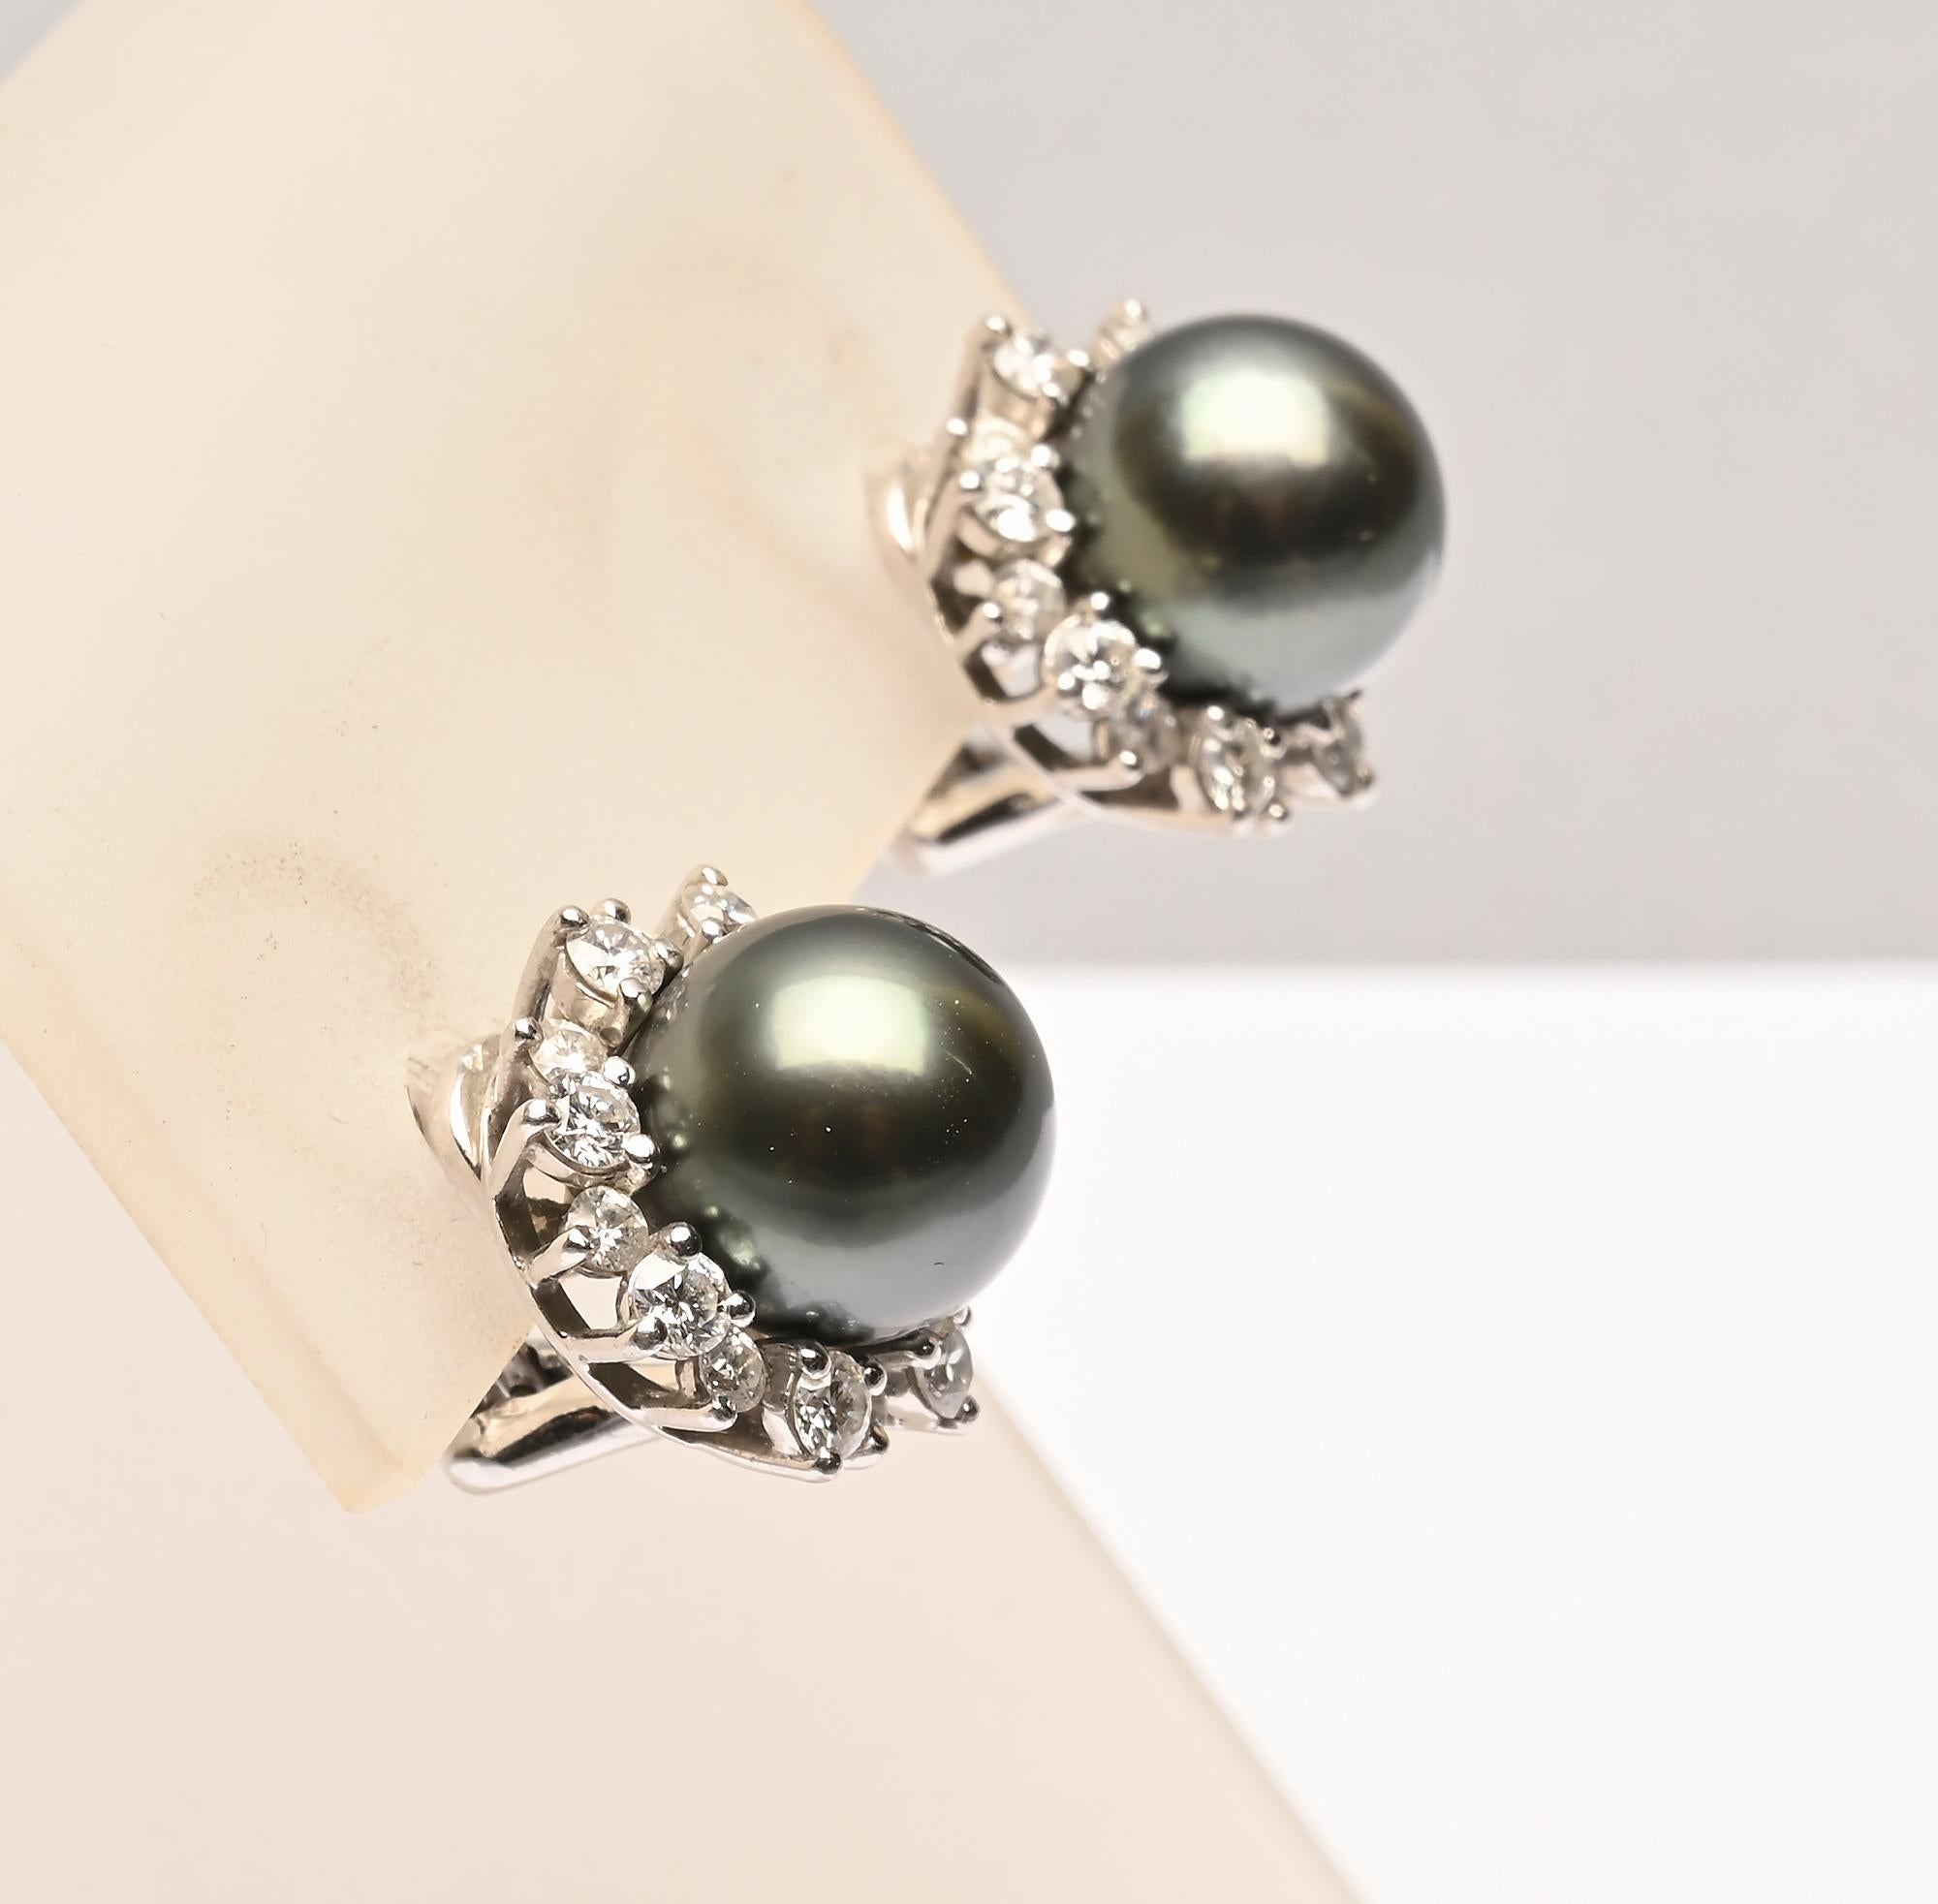 Stunning Mikimoto black South Sea pearl earrings with a surround of pear shaped diamonds. The pearls measure 10.5 millimeters, There are 32 diamonds with a total  weight of  .66 carats. The earrings are set in platinum. Clip and post backs can be